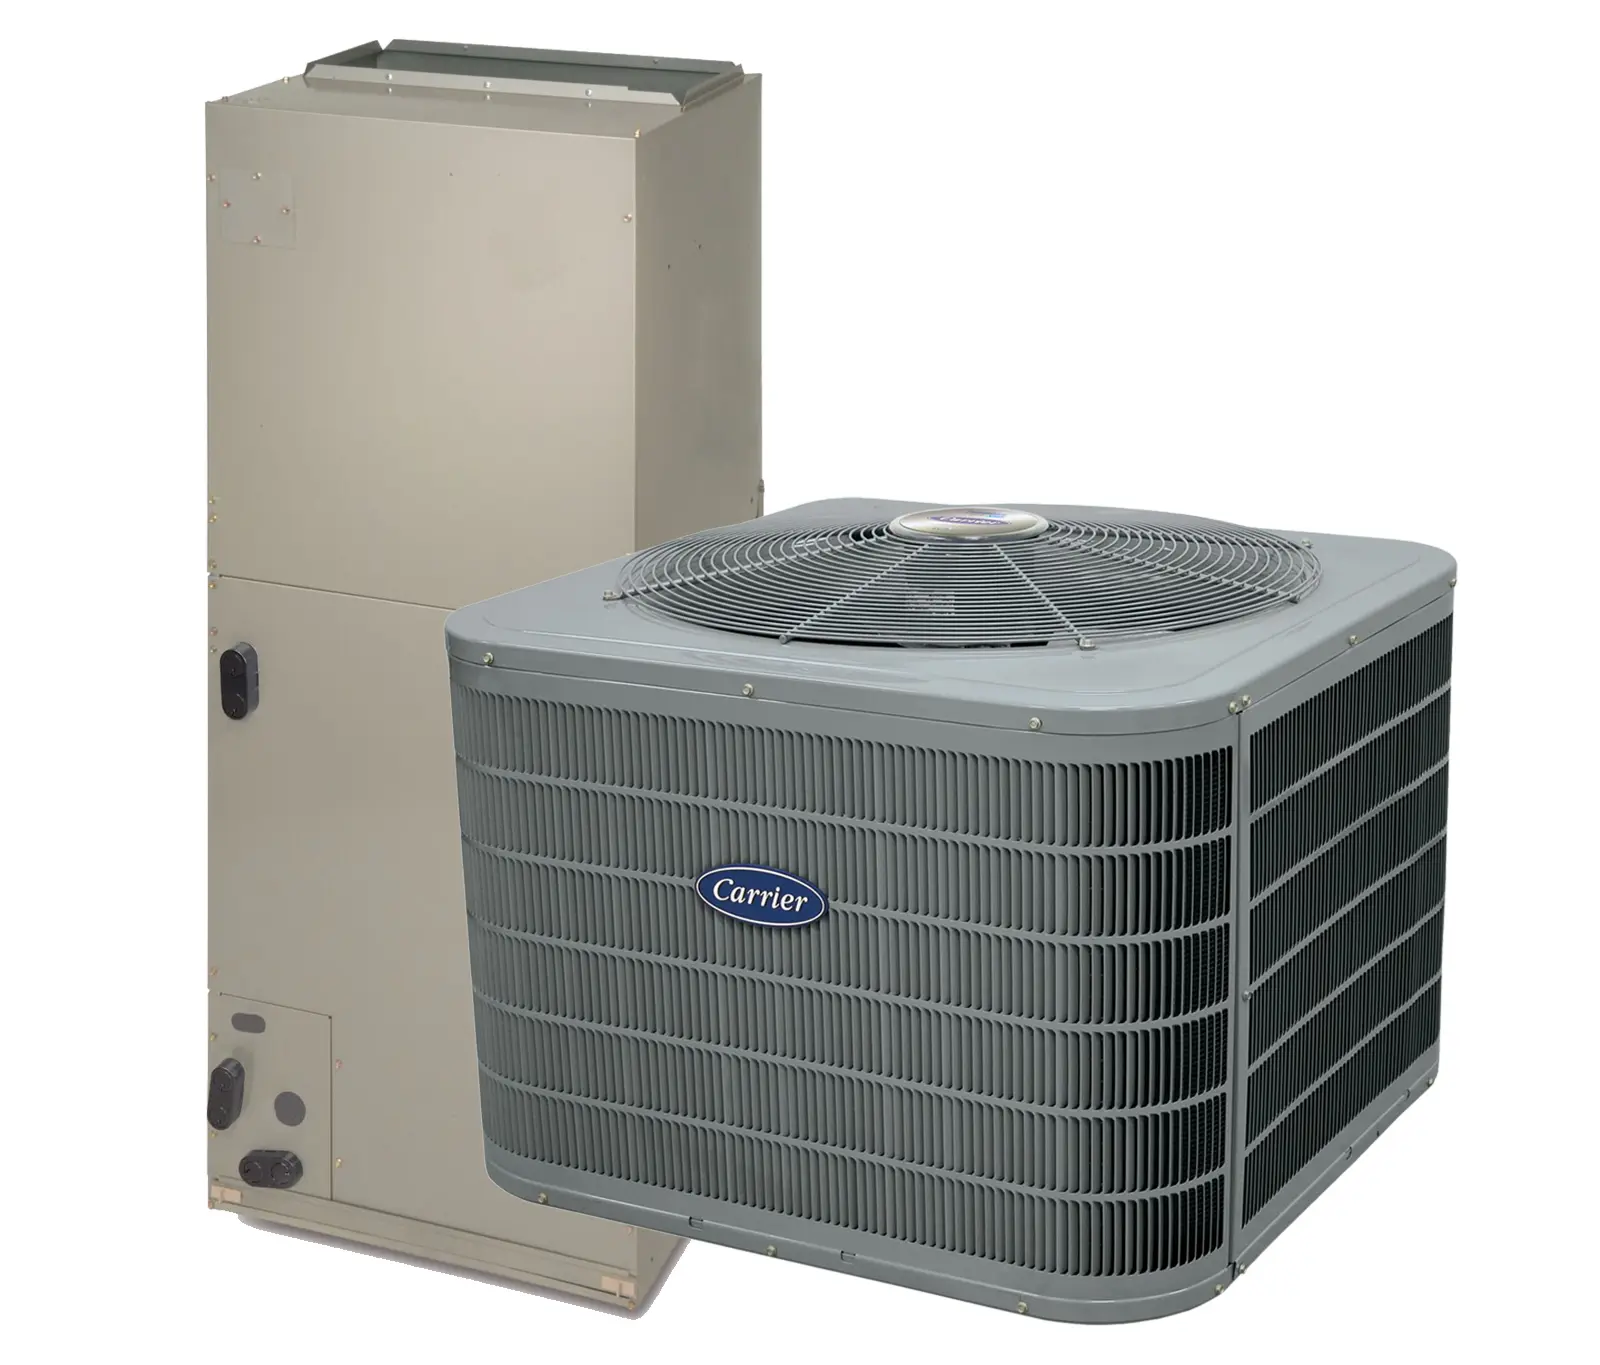 Carrier performance AC unit pricing